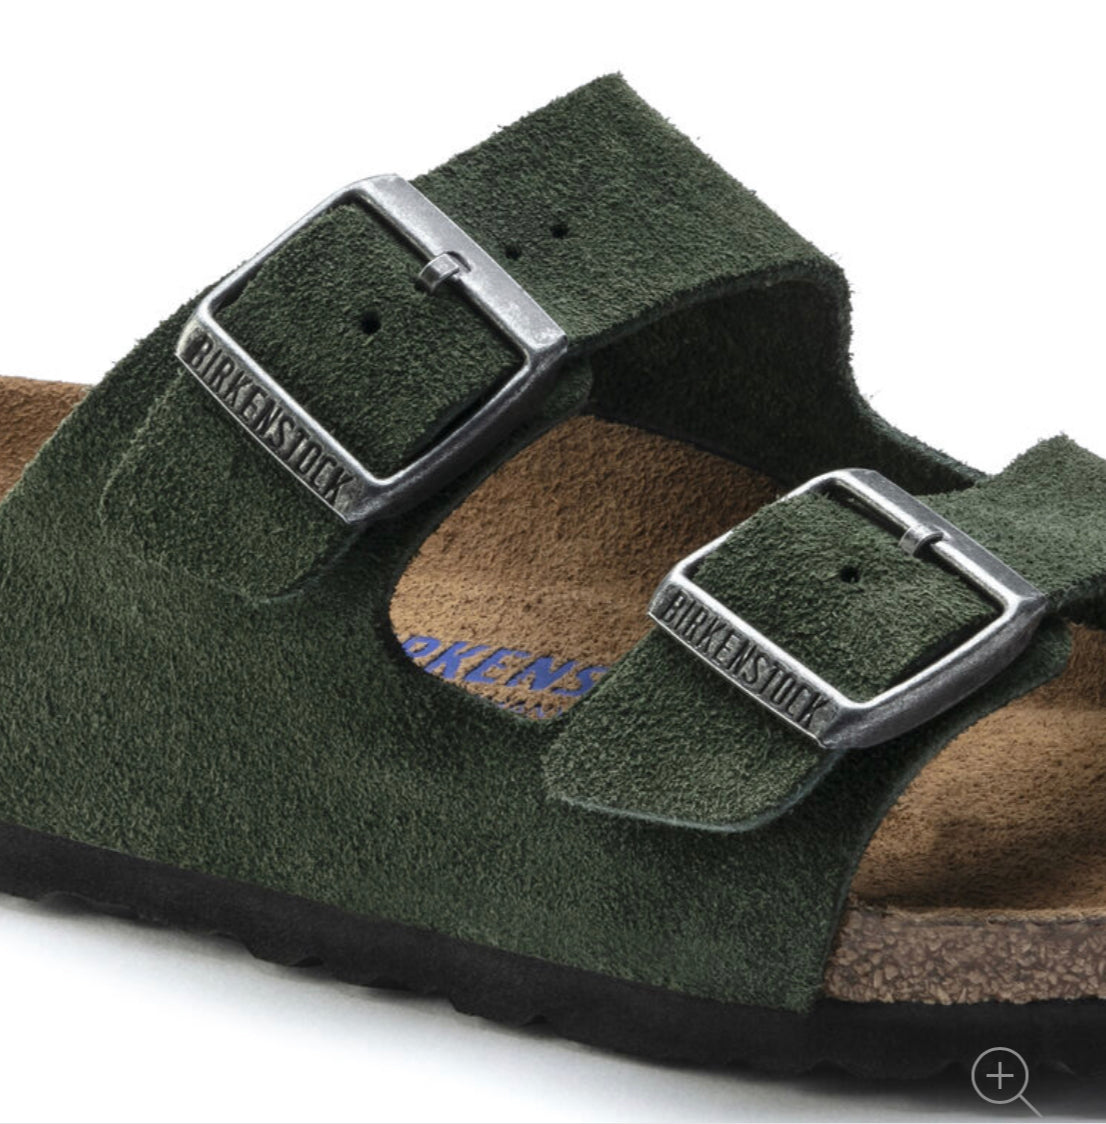 Birkenstock Arizona Mountain View Green Suede Leather Soft Footbed Made In Germany